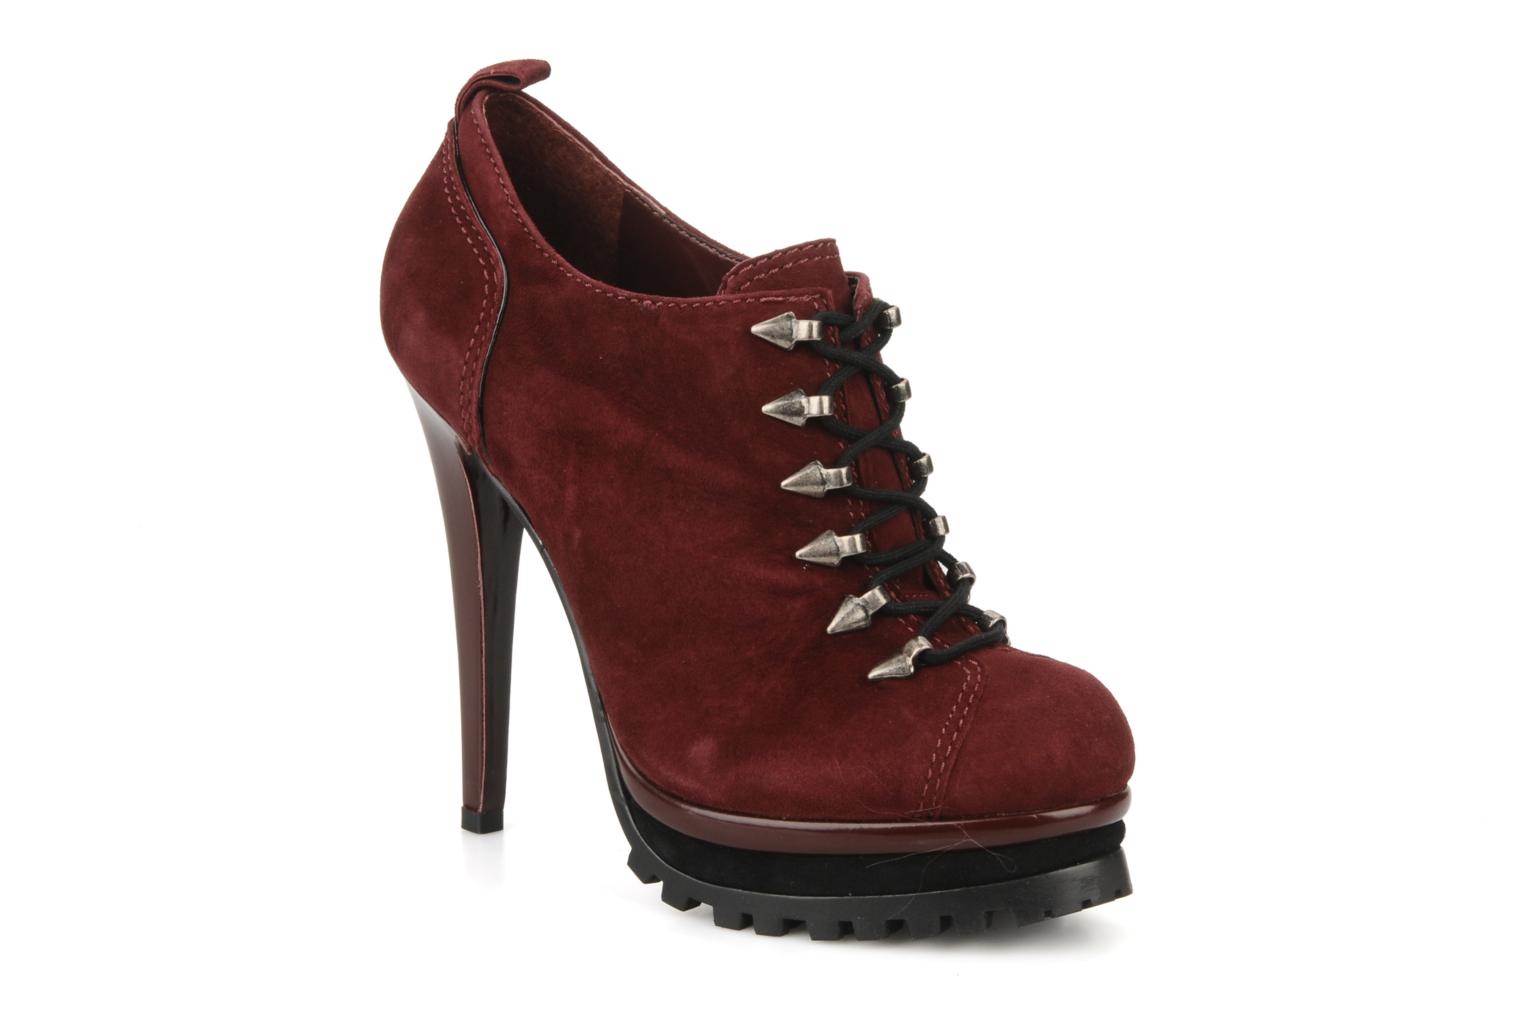 Carvela Amiable Lace-up shoes in Burgundy at Sarenza.co.uk (73865)